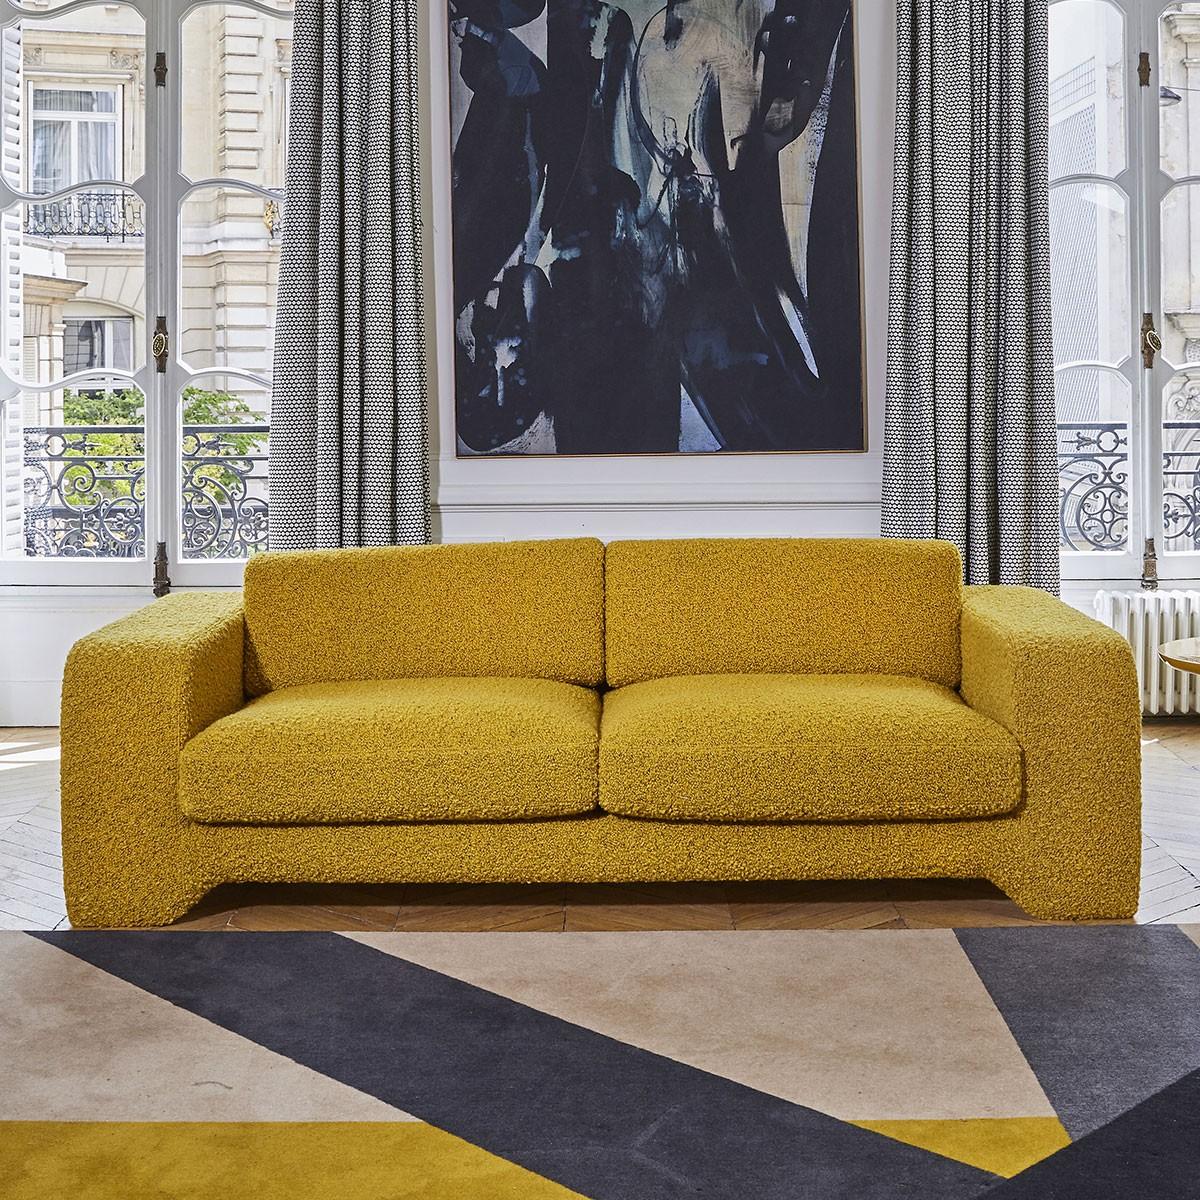 Popus Editions Giovanna 2.5 seater sofa in brown como velvet upholstery

Giovanna is a sofa with a strong profile. A sober, plush line, with this famous detail that changes everything, so as not to forget its strength of character and this